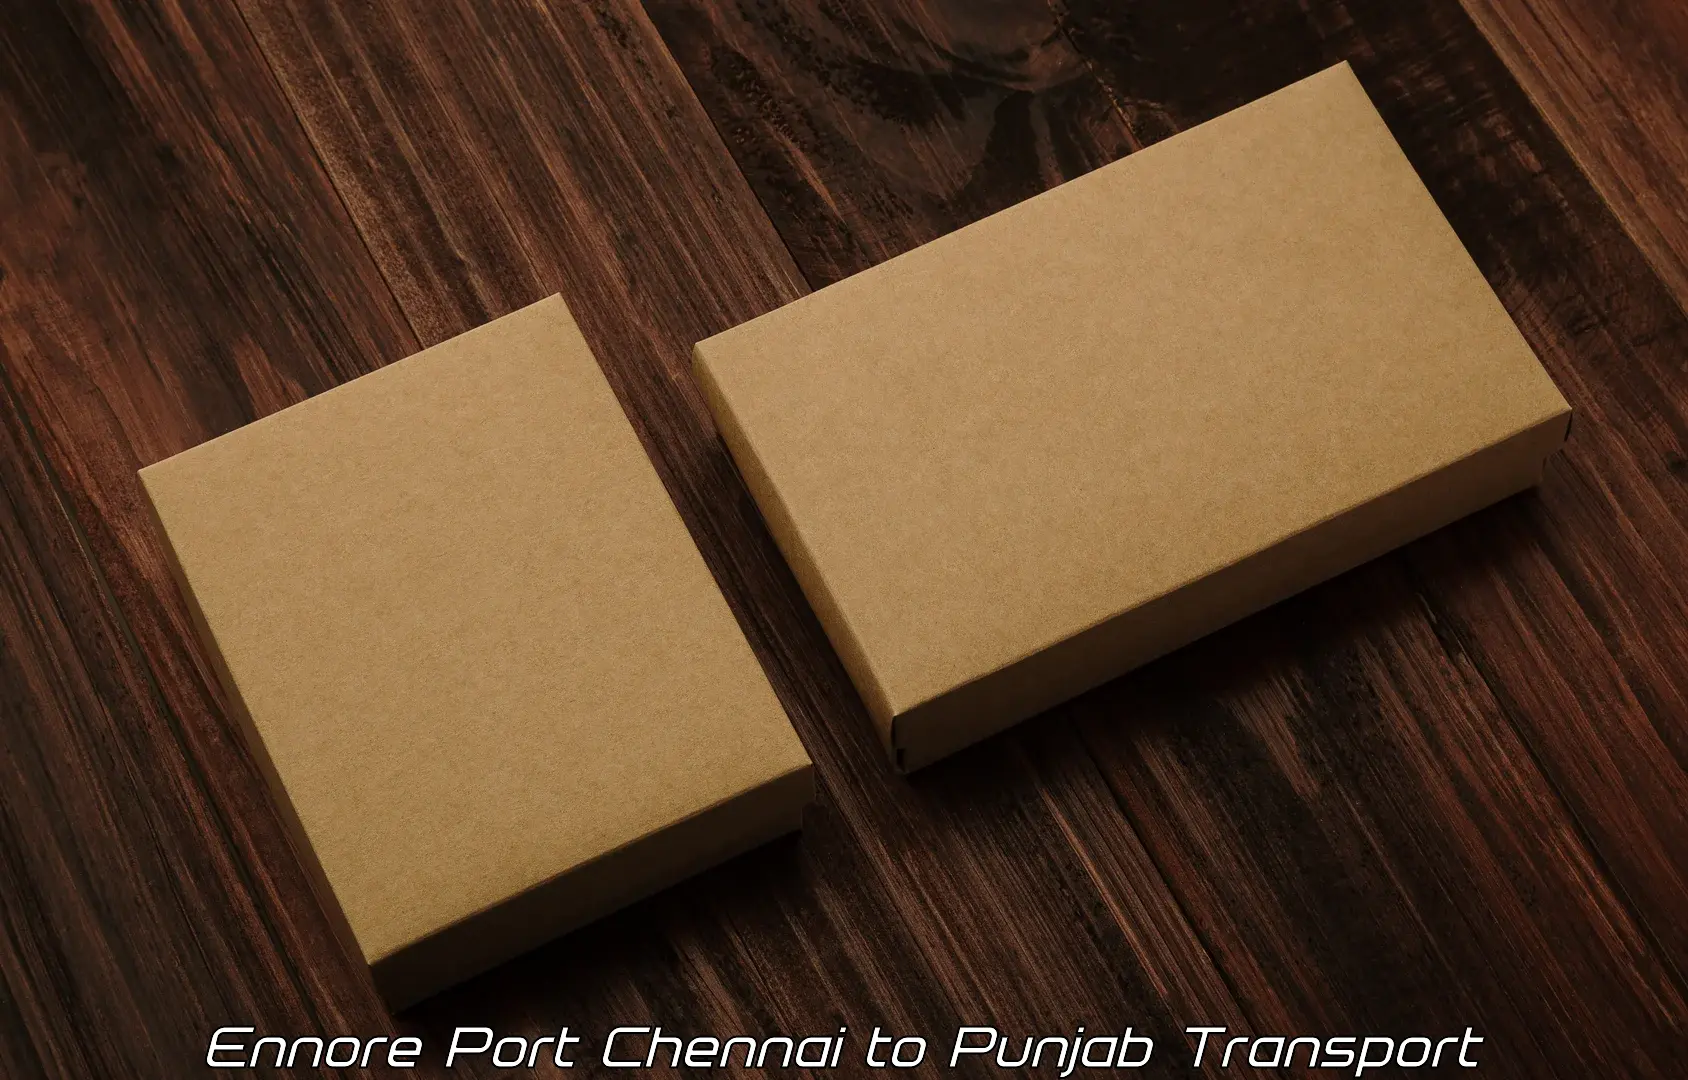 Material transport services Ennore Port Chennai to Mohali